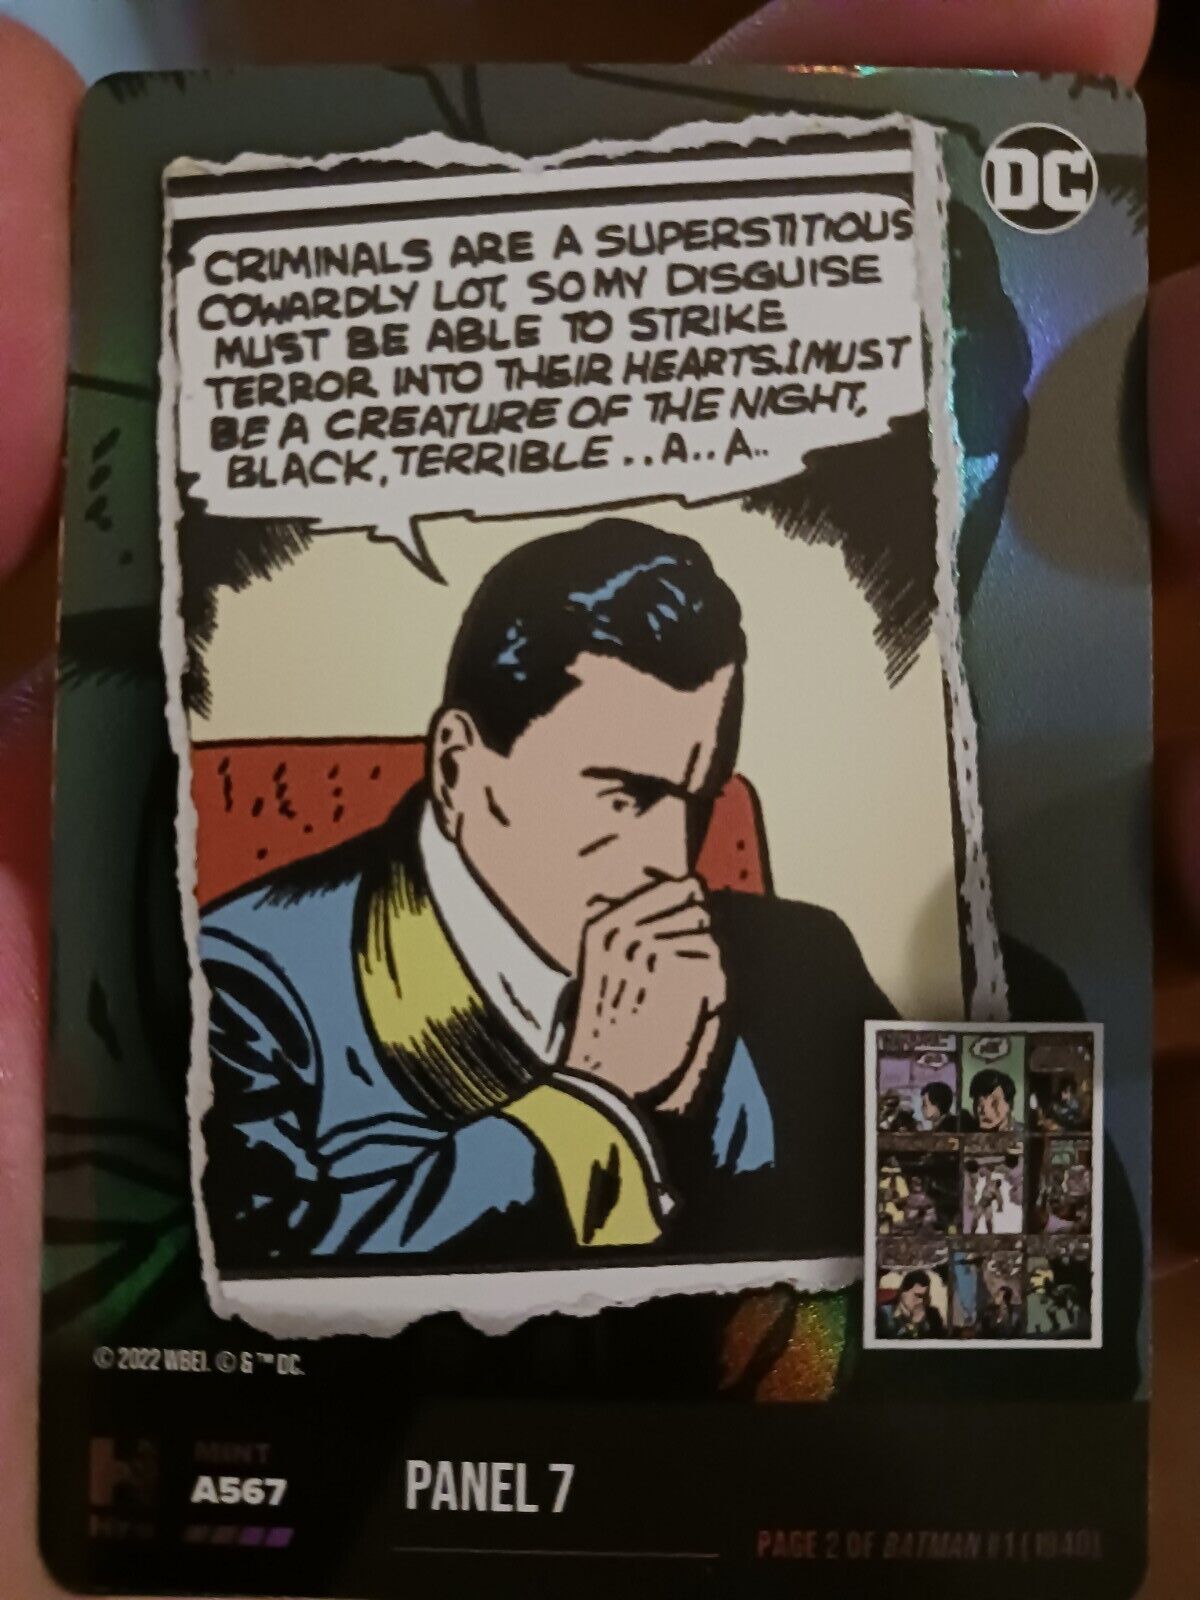 DC Chapter 1 (Page 2 of Batman #1) PANEL 7 A567 Physical Trading Card